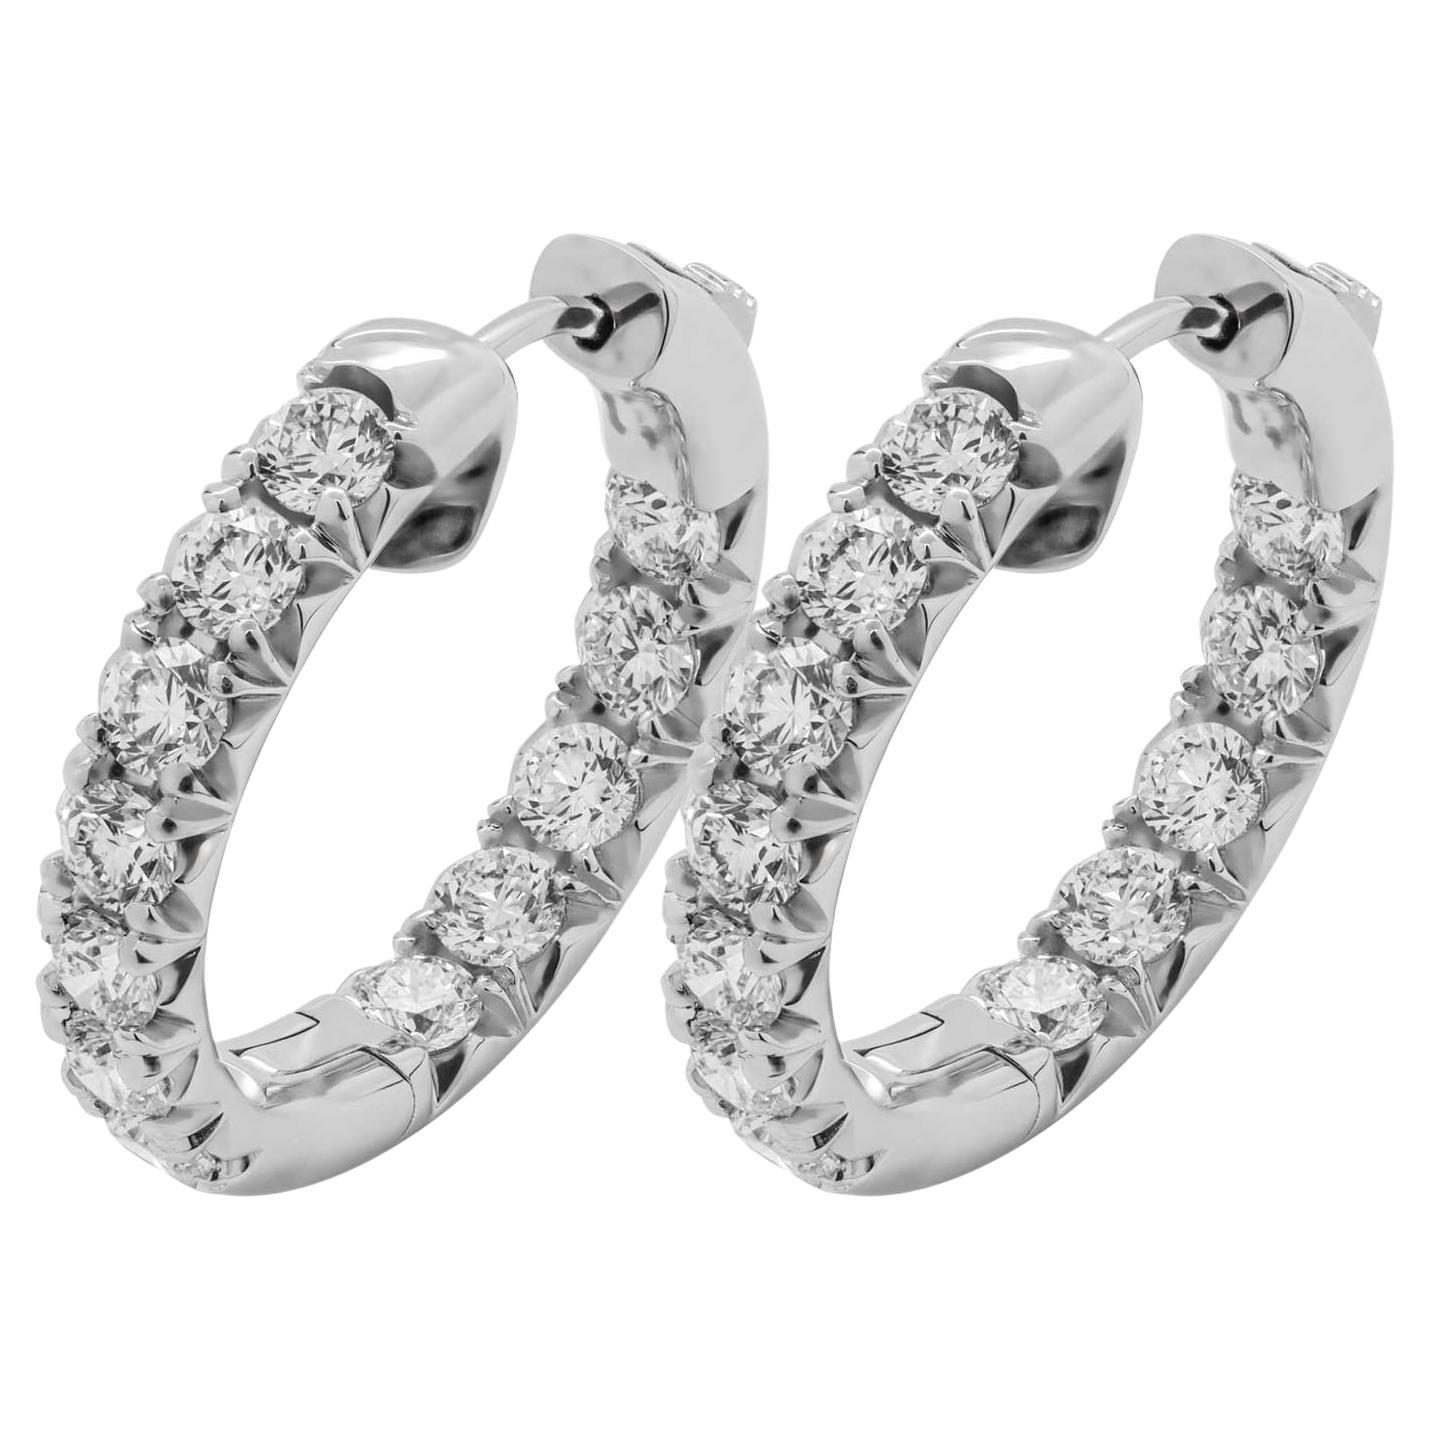 Diamond Hoop Earrings in White Gold with 4.7ct